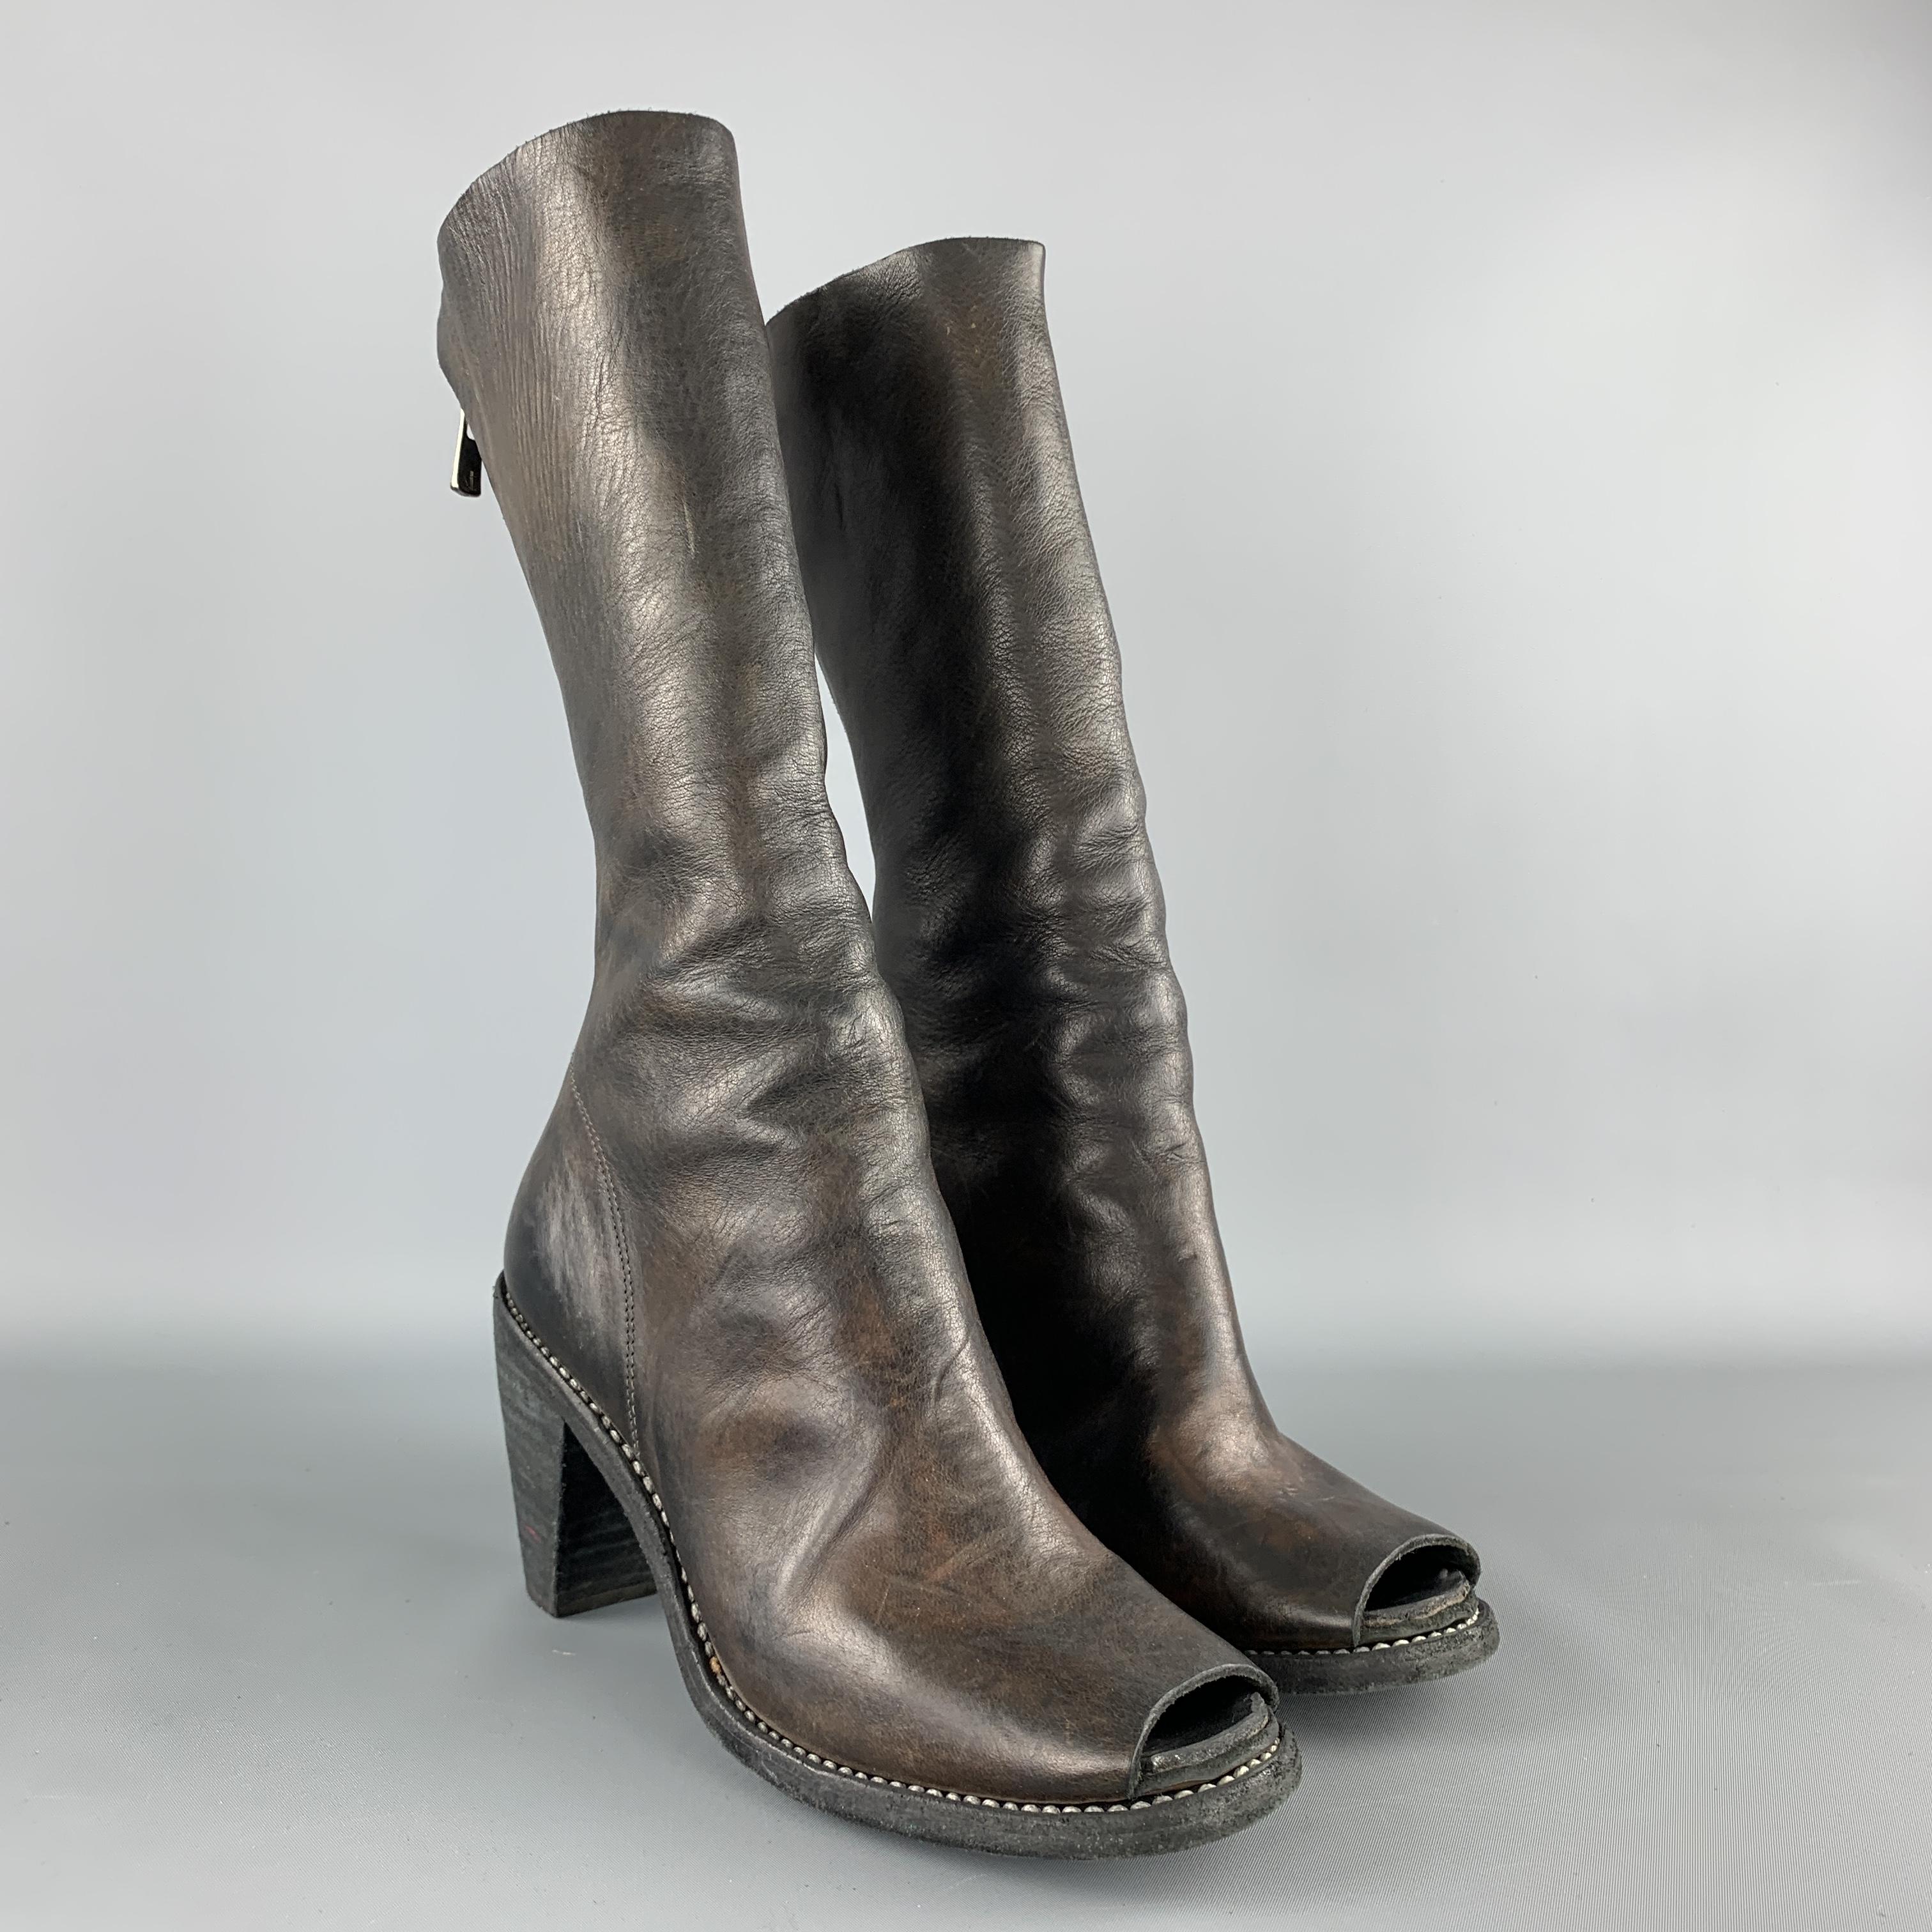 GUIDI calf high boots come in brown horse hide leather with a peep toe, calf high back zip shaft, and stacked heel. Made in Italy.

Very Good Pre-Owned Condition.
Marked: IT 37
Original Retail Price: $1,840.00

Heel: 3.25 in.
Length: 11 in.